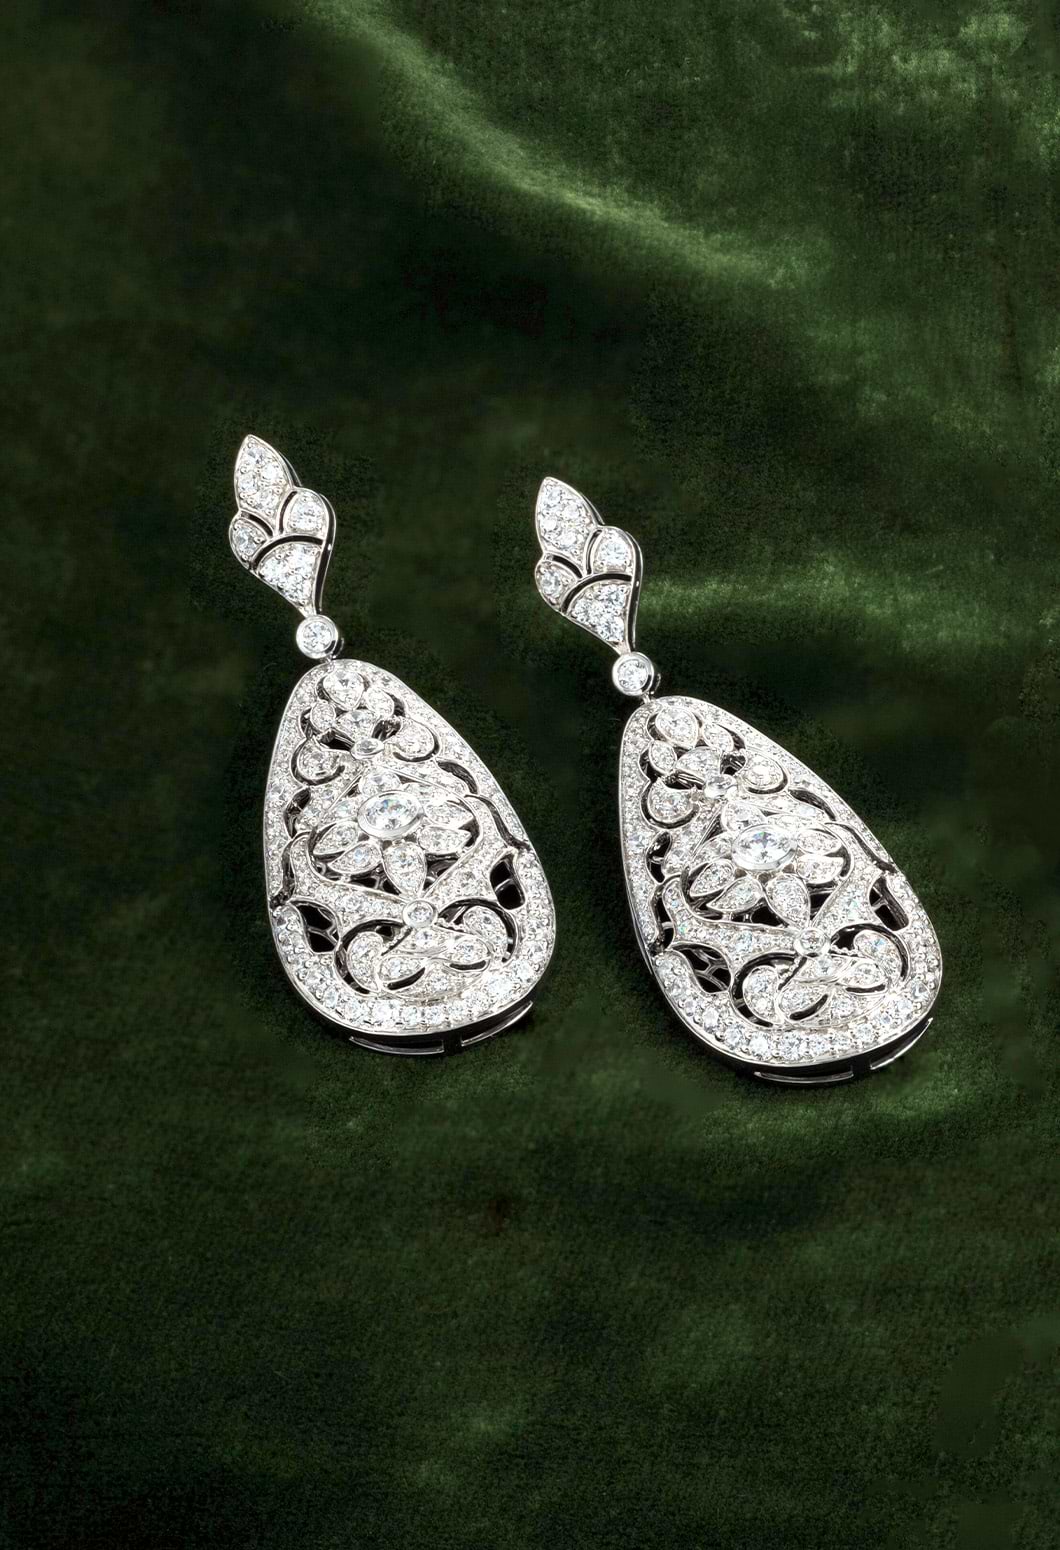 A pair of diamond drop earrings featured on a green background